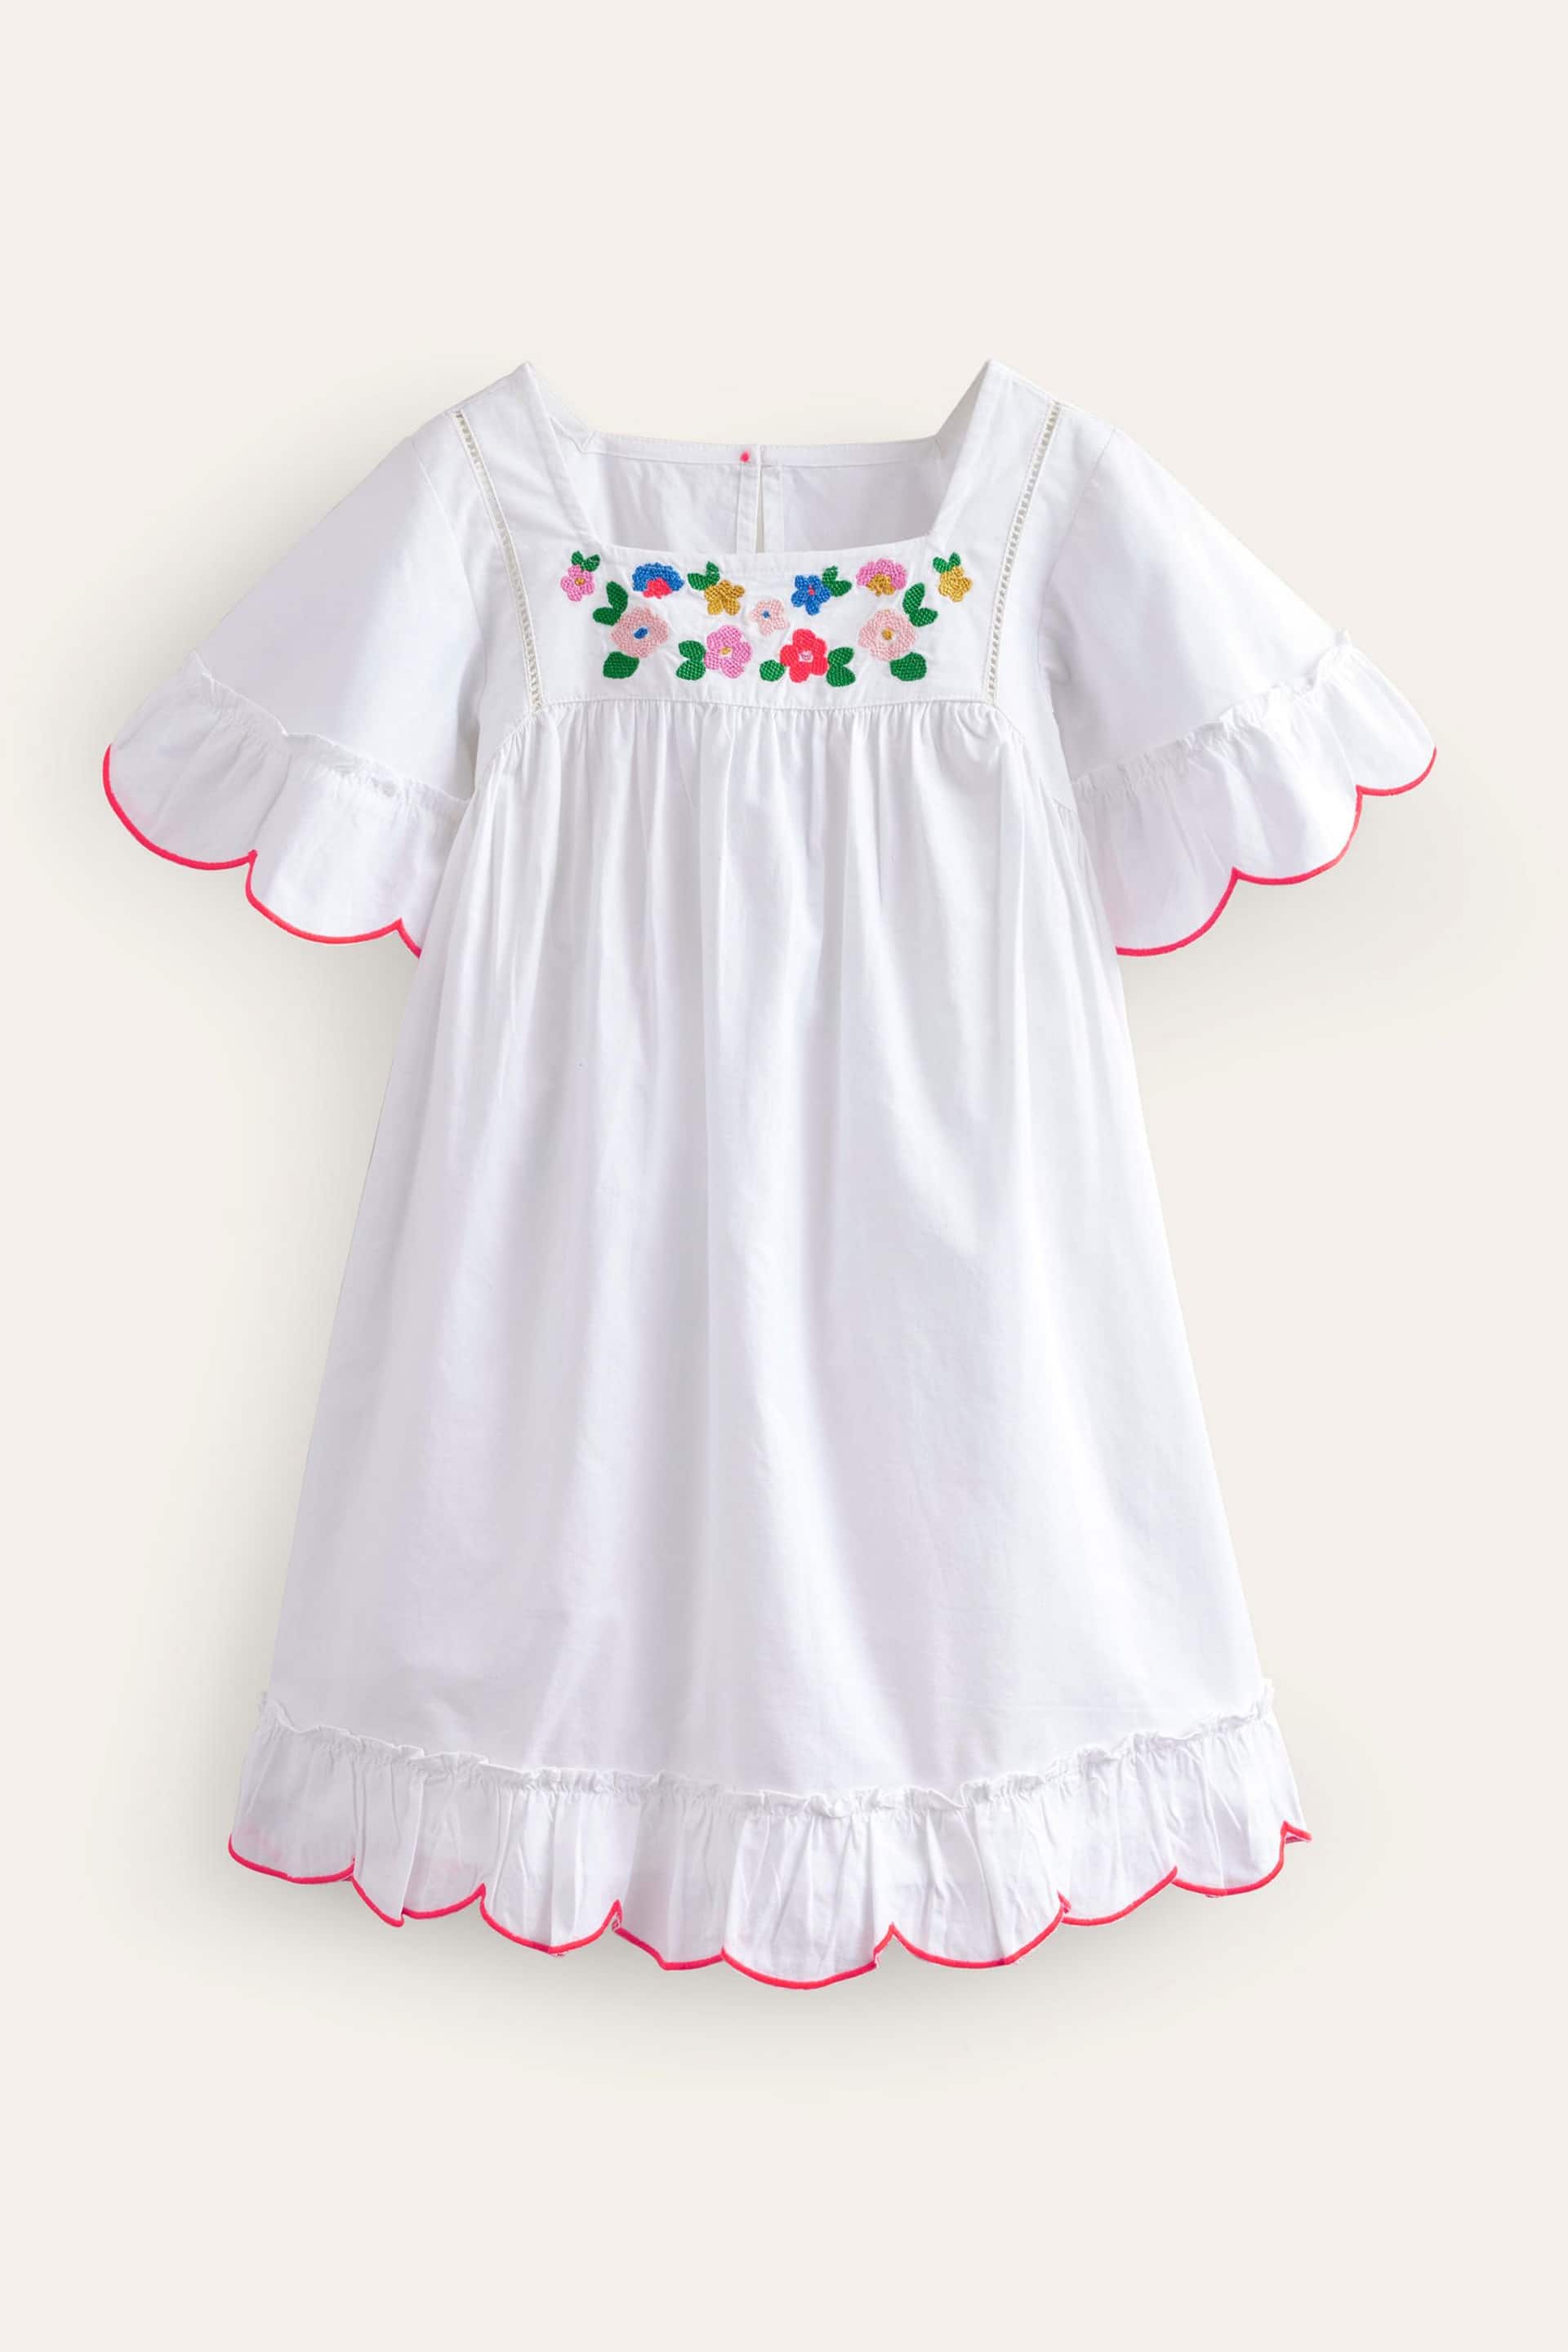 Boden White Lightweight Holiday Dress - Image 1 of 3